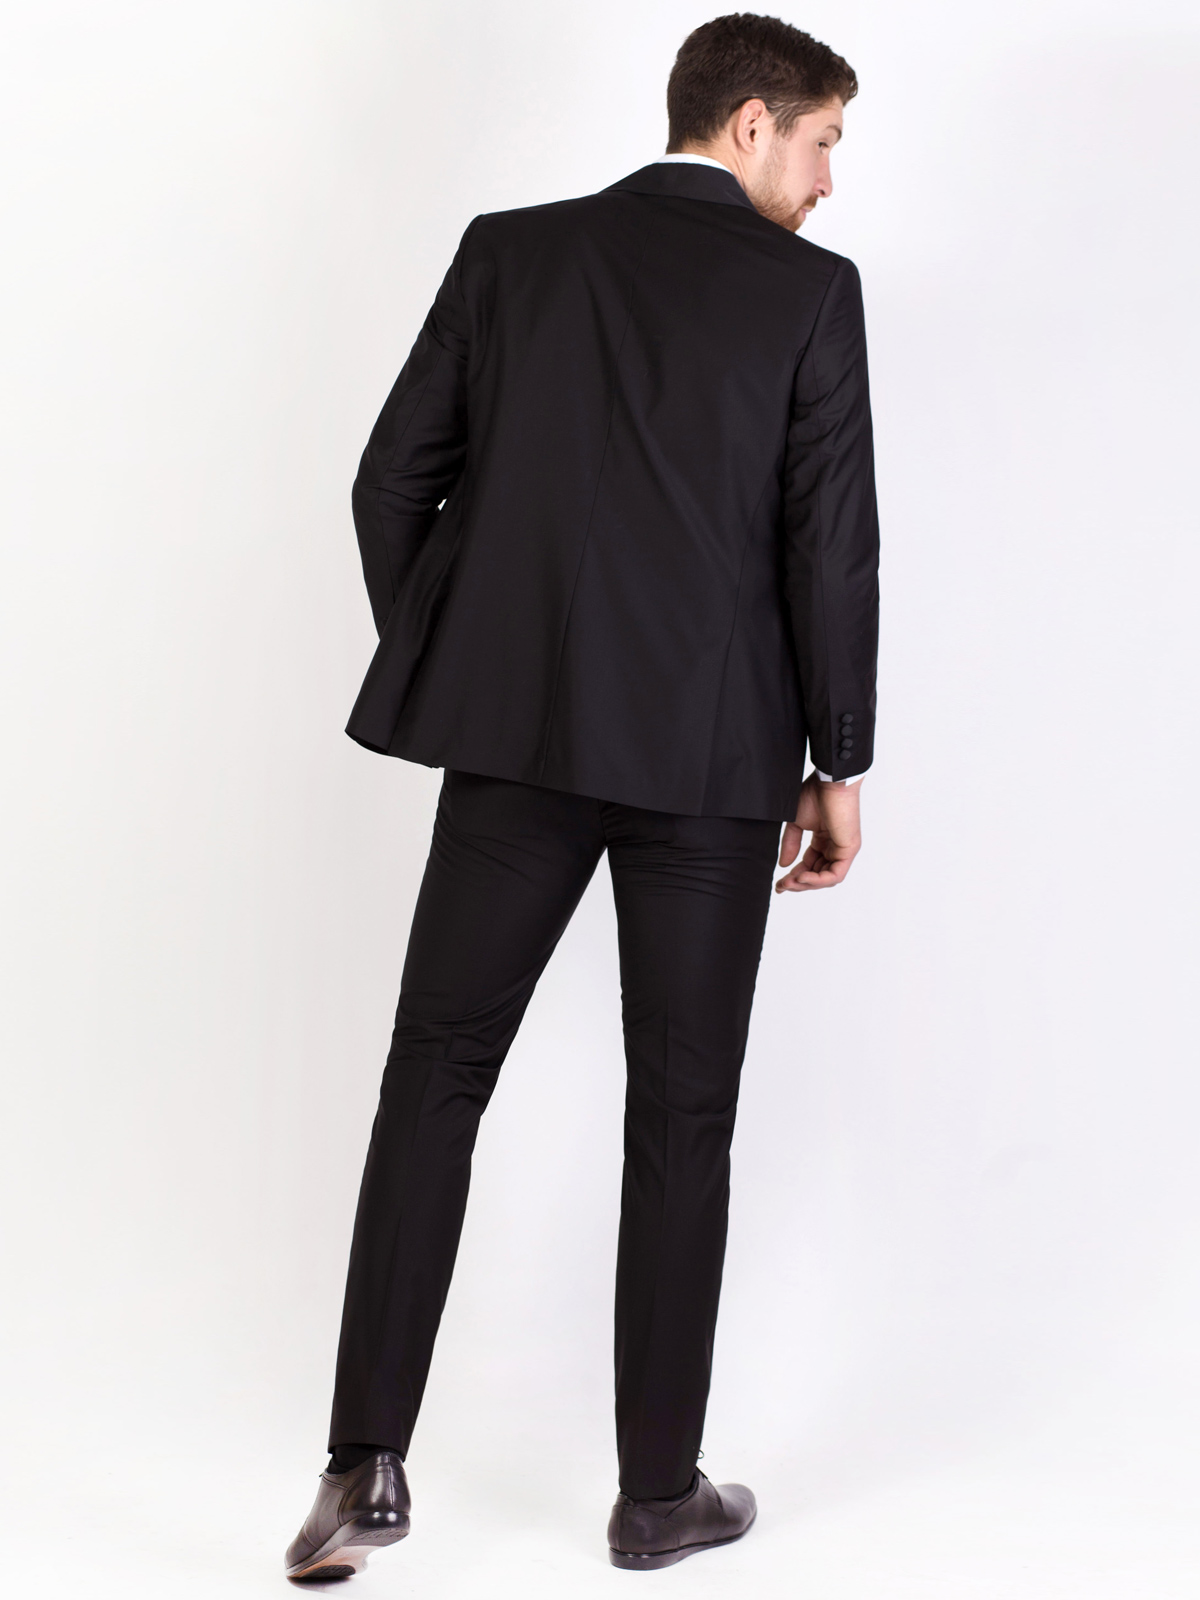  black suit with a satin collar scarf  - 68050 € 191.80 img4